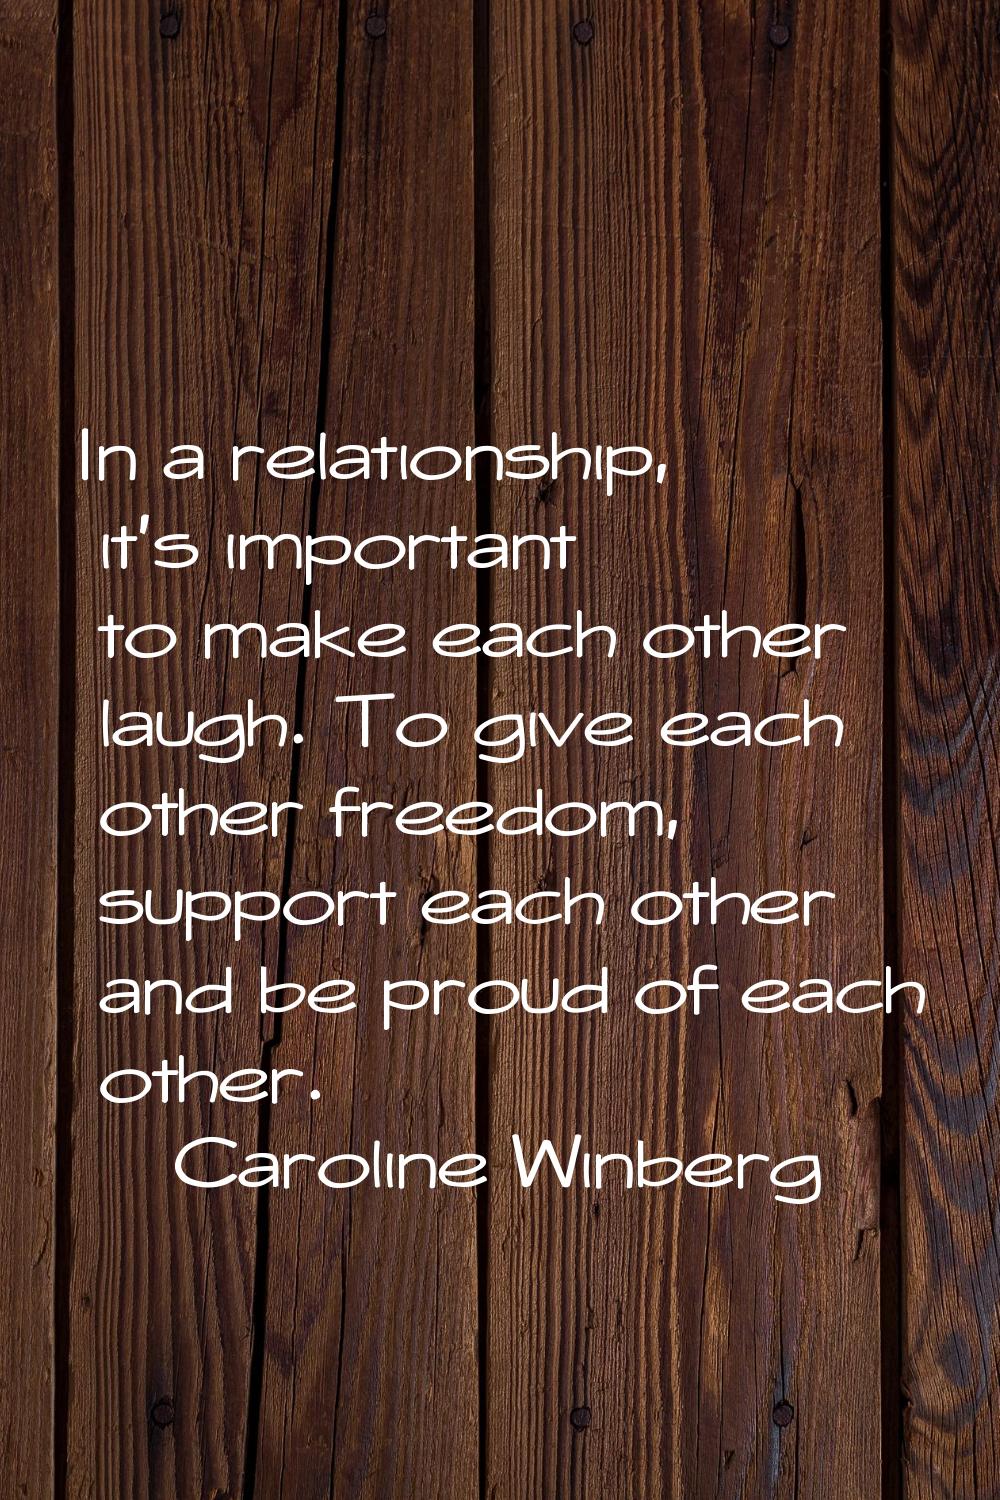 In a relationship, it's important to make each other laugh. To give each other freedom, support eac